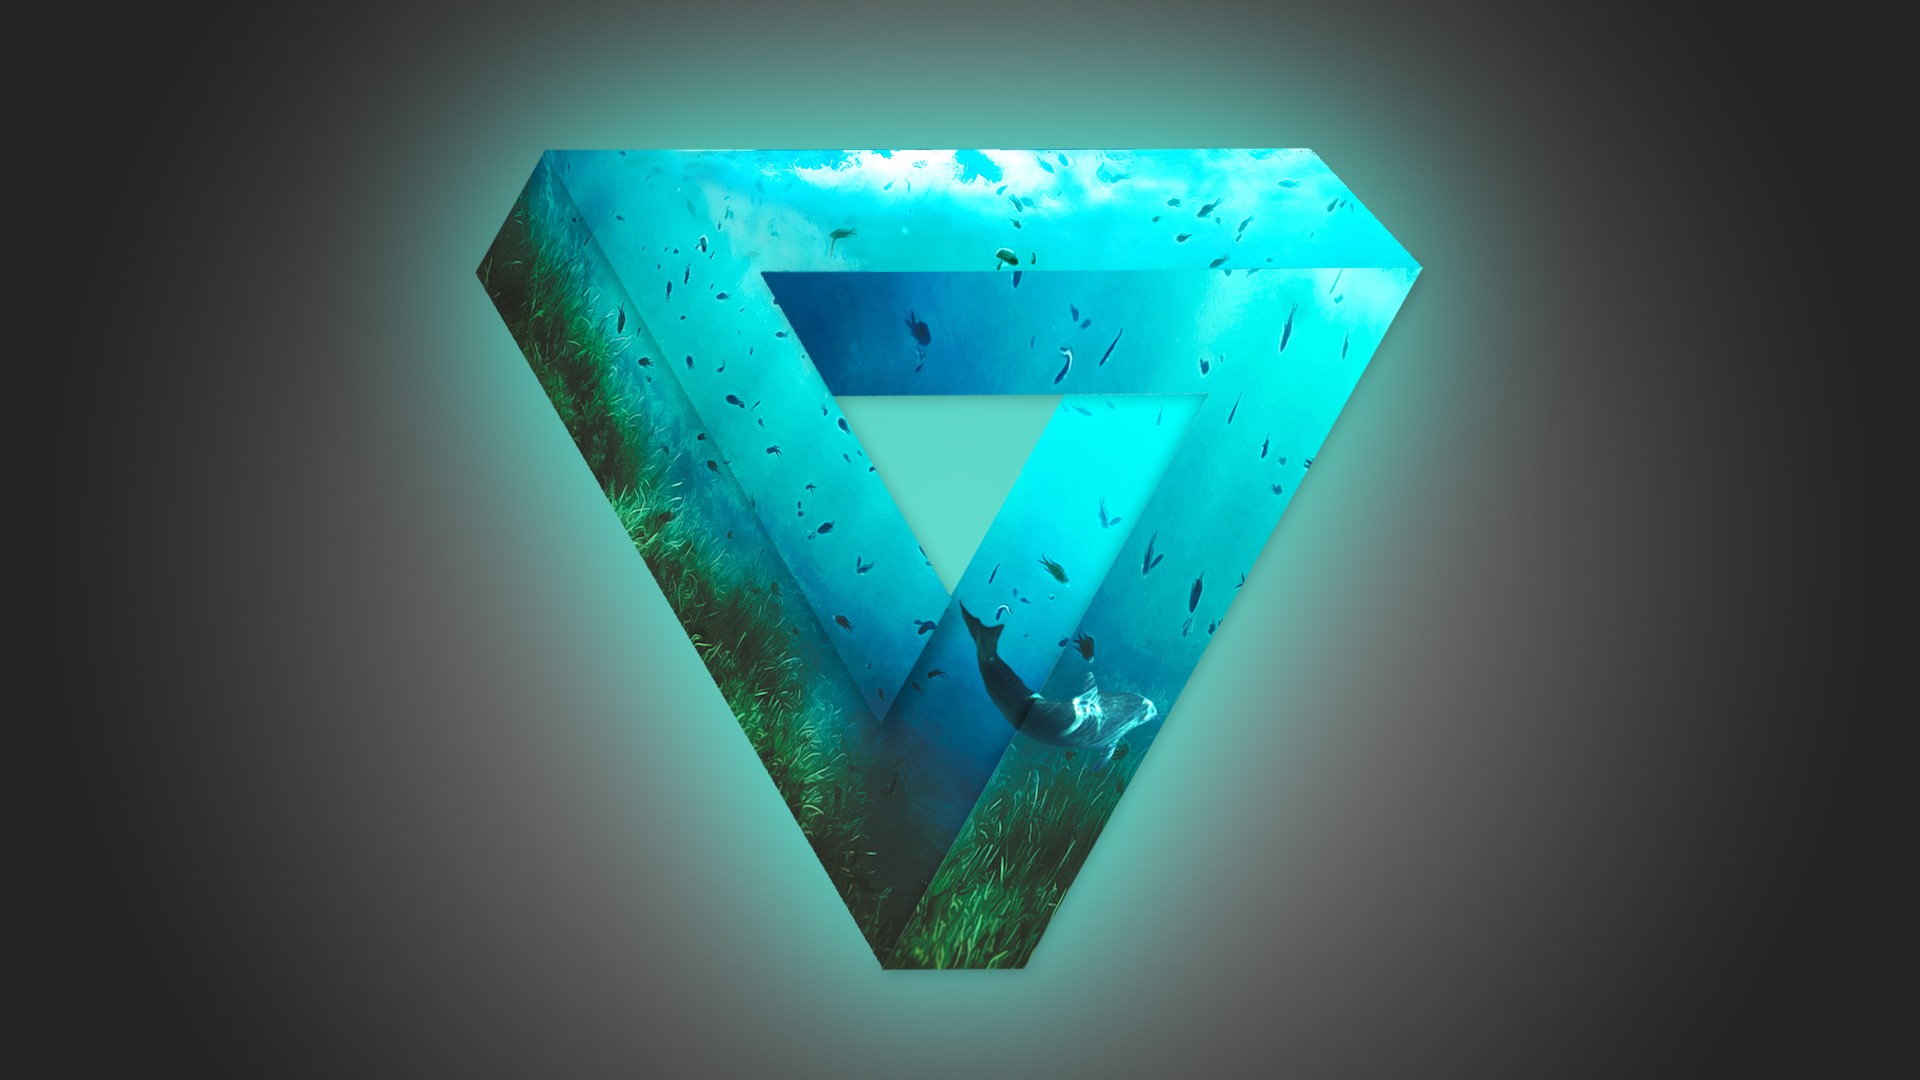 Soft Gradient Triangle Glowing Fish Photoshop Whale Penrose Triangle Underwater Optical Illusion Sim 1920x1080